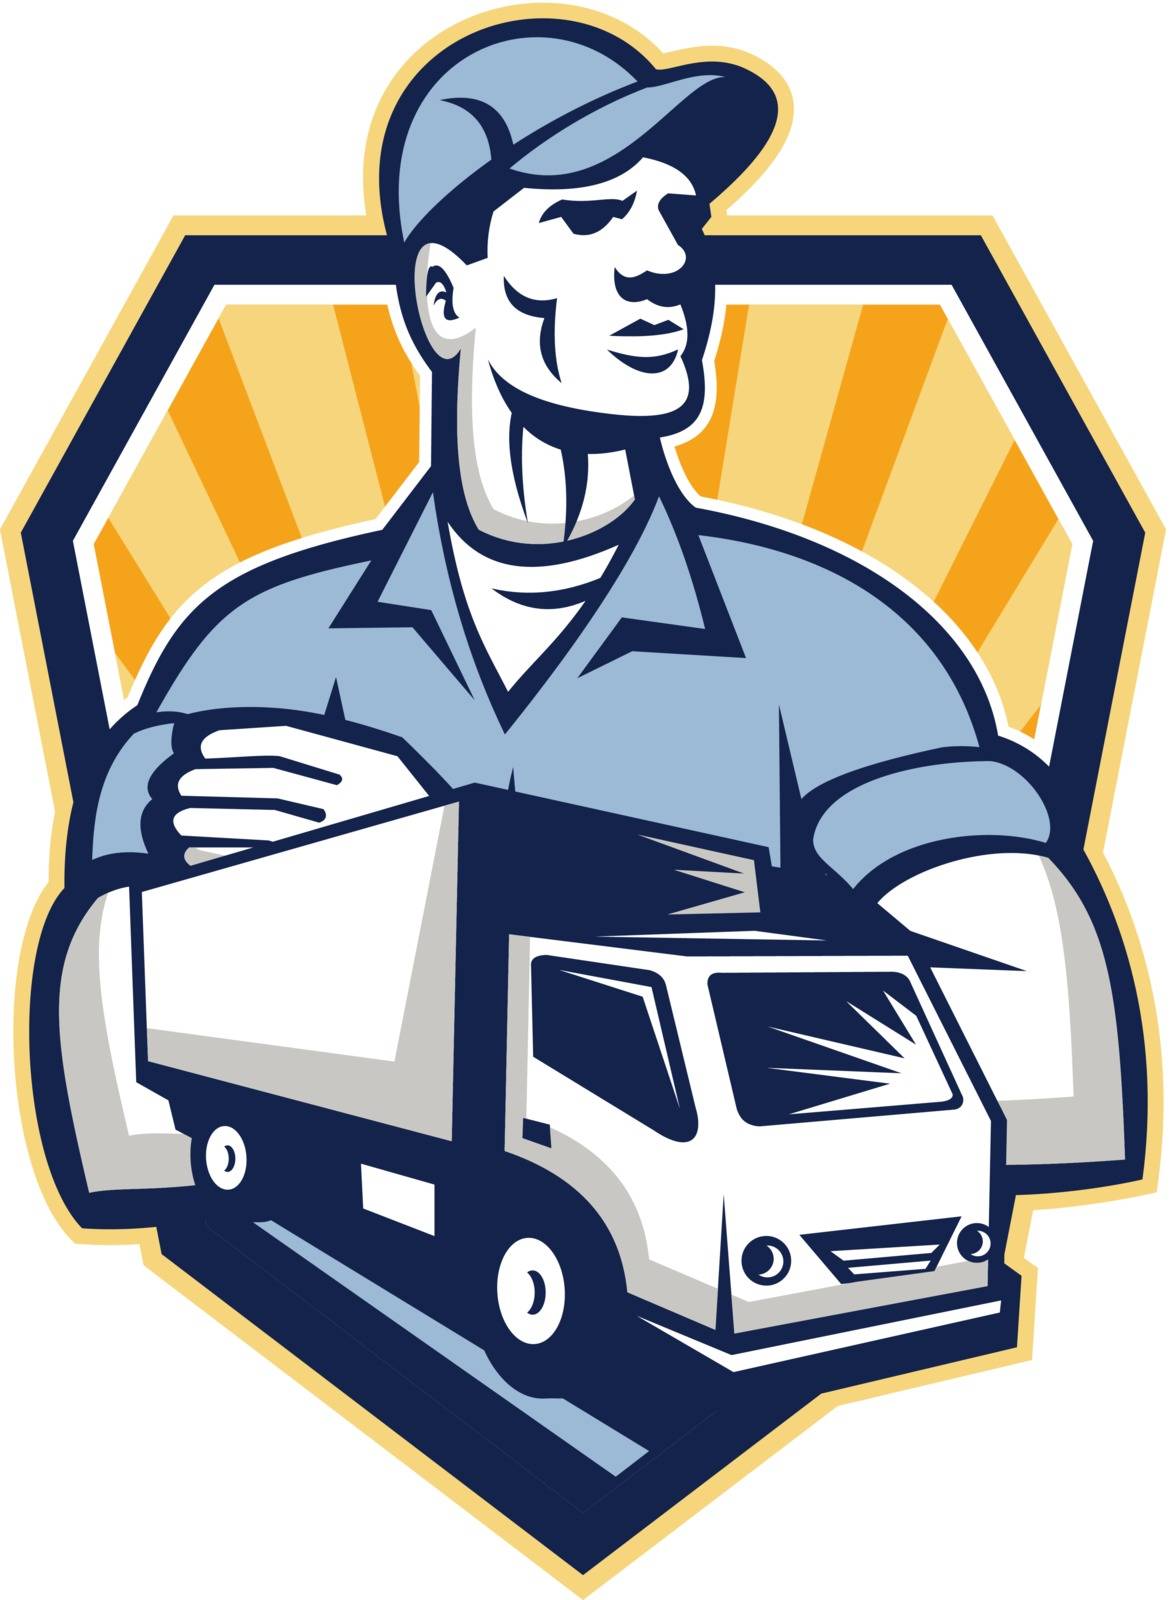 Illustration of a removal man delivery guy with moving truck van in the foreground set inside shield crest done in retro style.